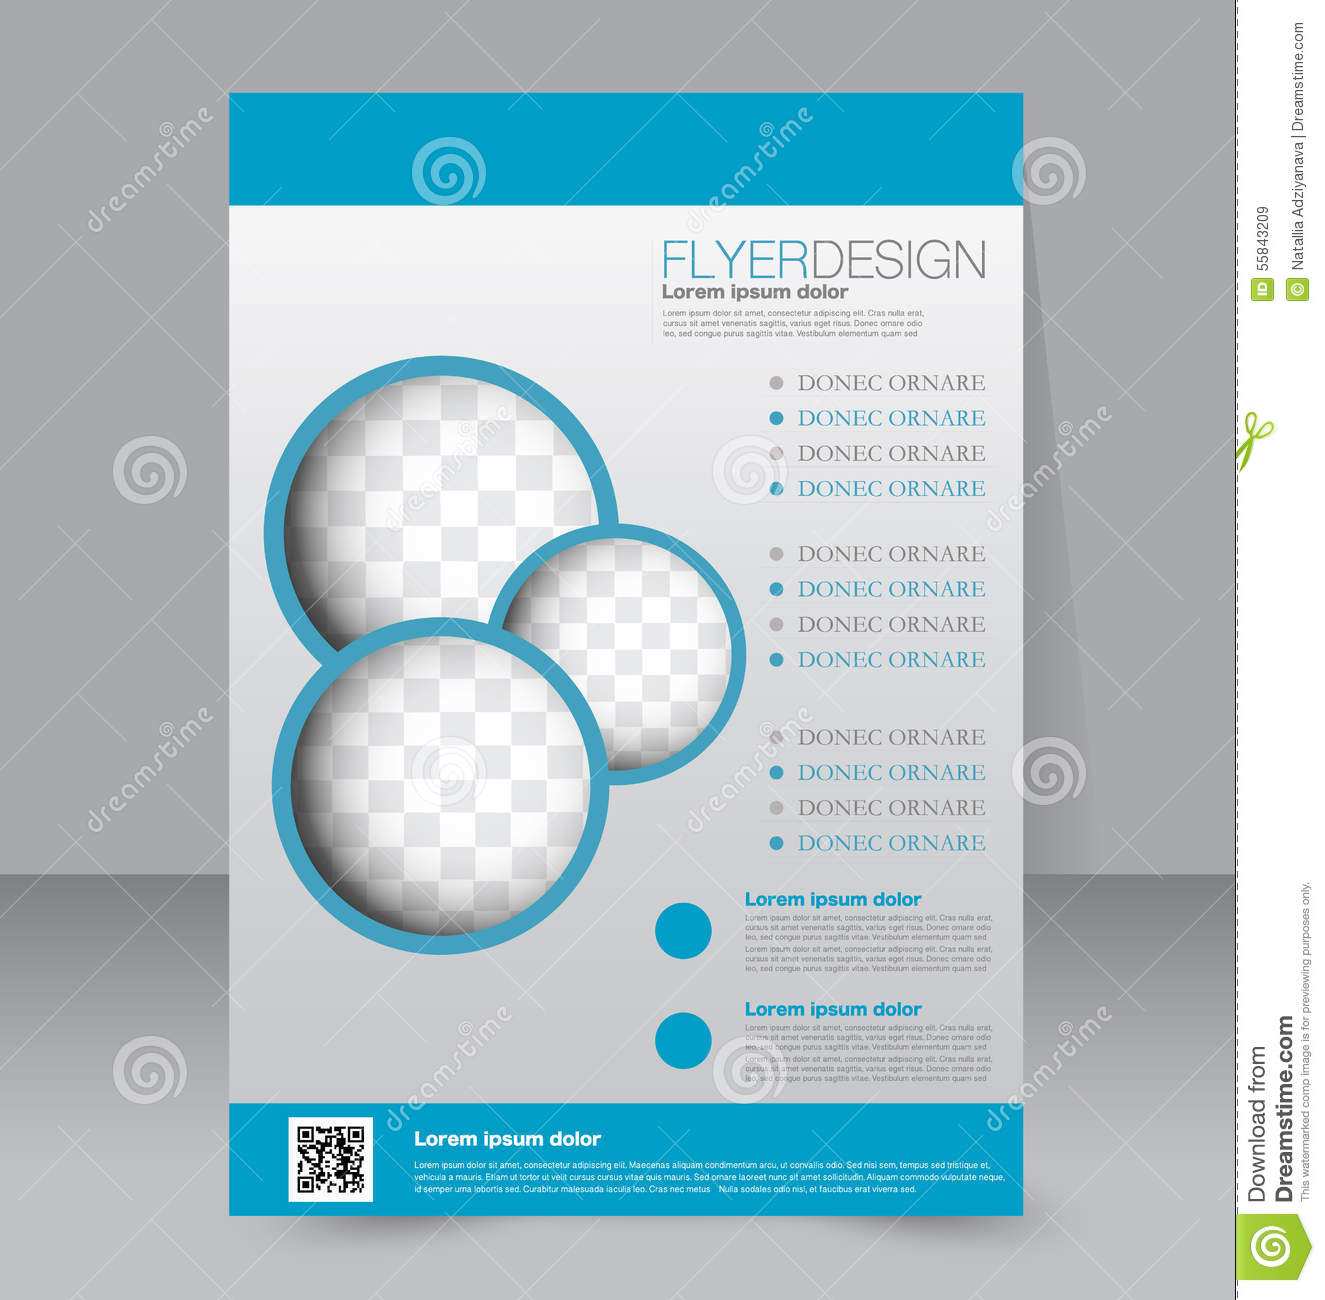 30 Free Templates For Flyers Free Downloads Formating for Templates For Flyers Free Downloads